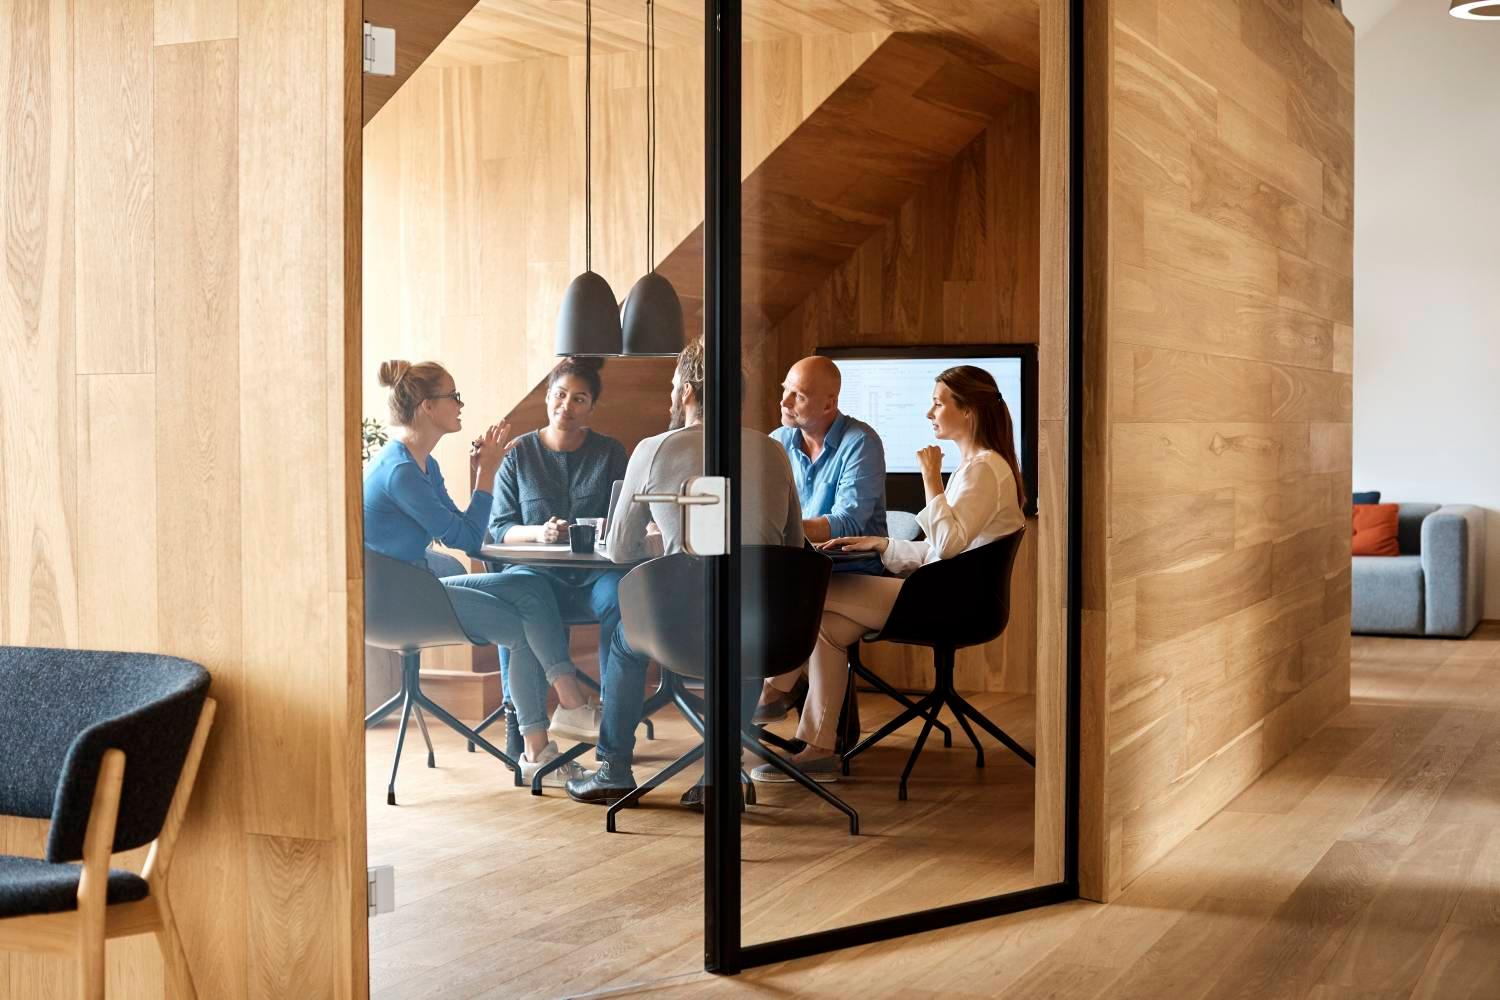 Business professionals discussing in meeting seen through glass door at office